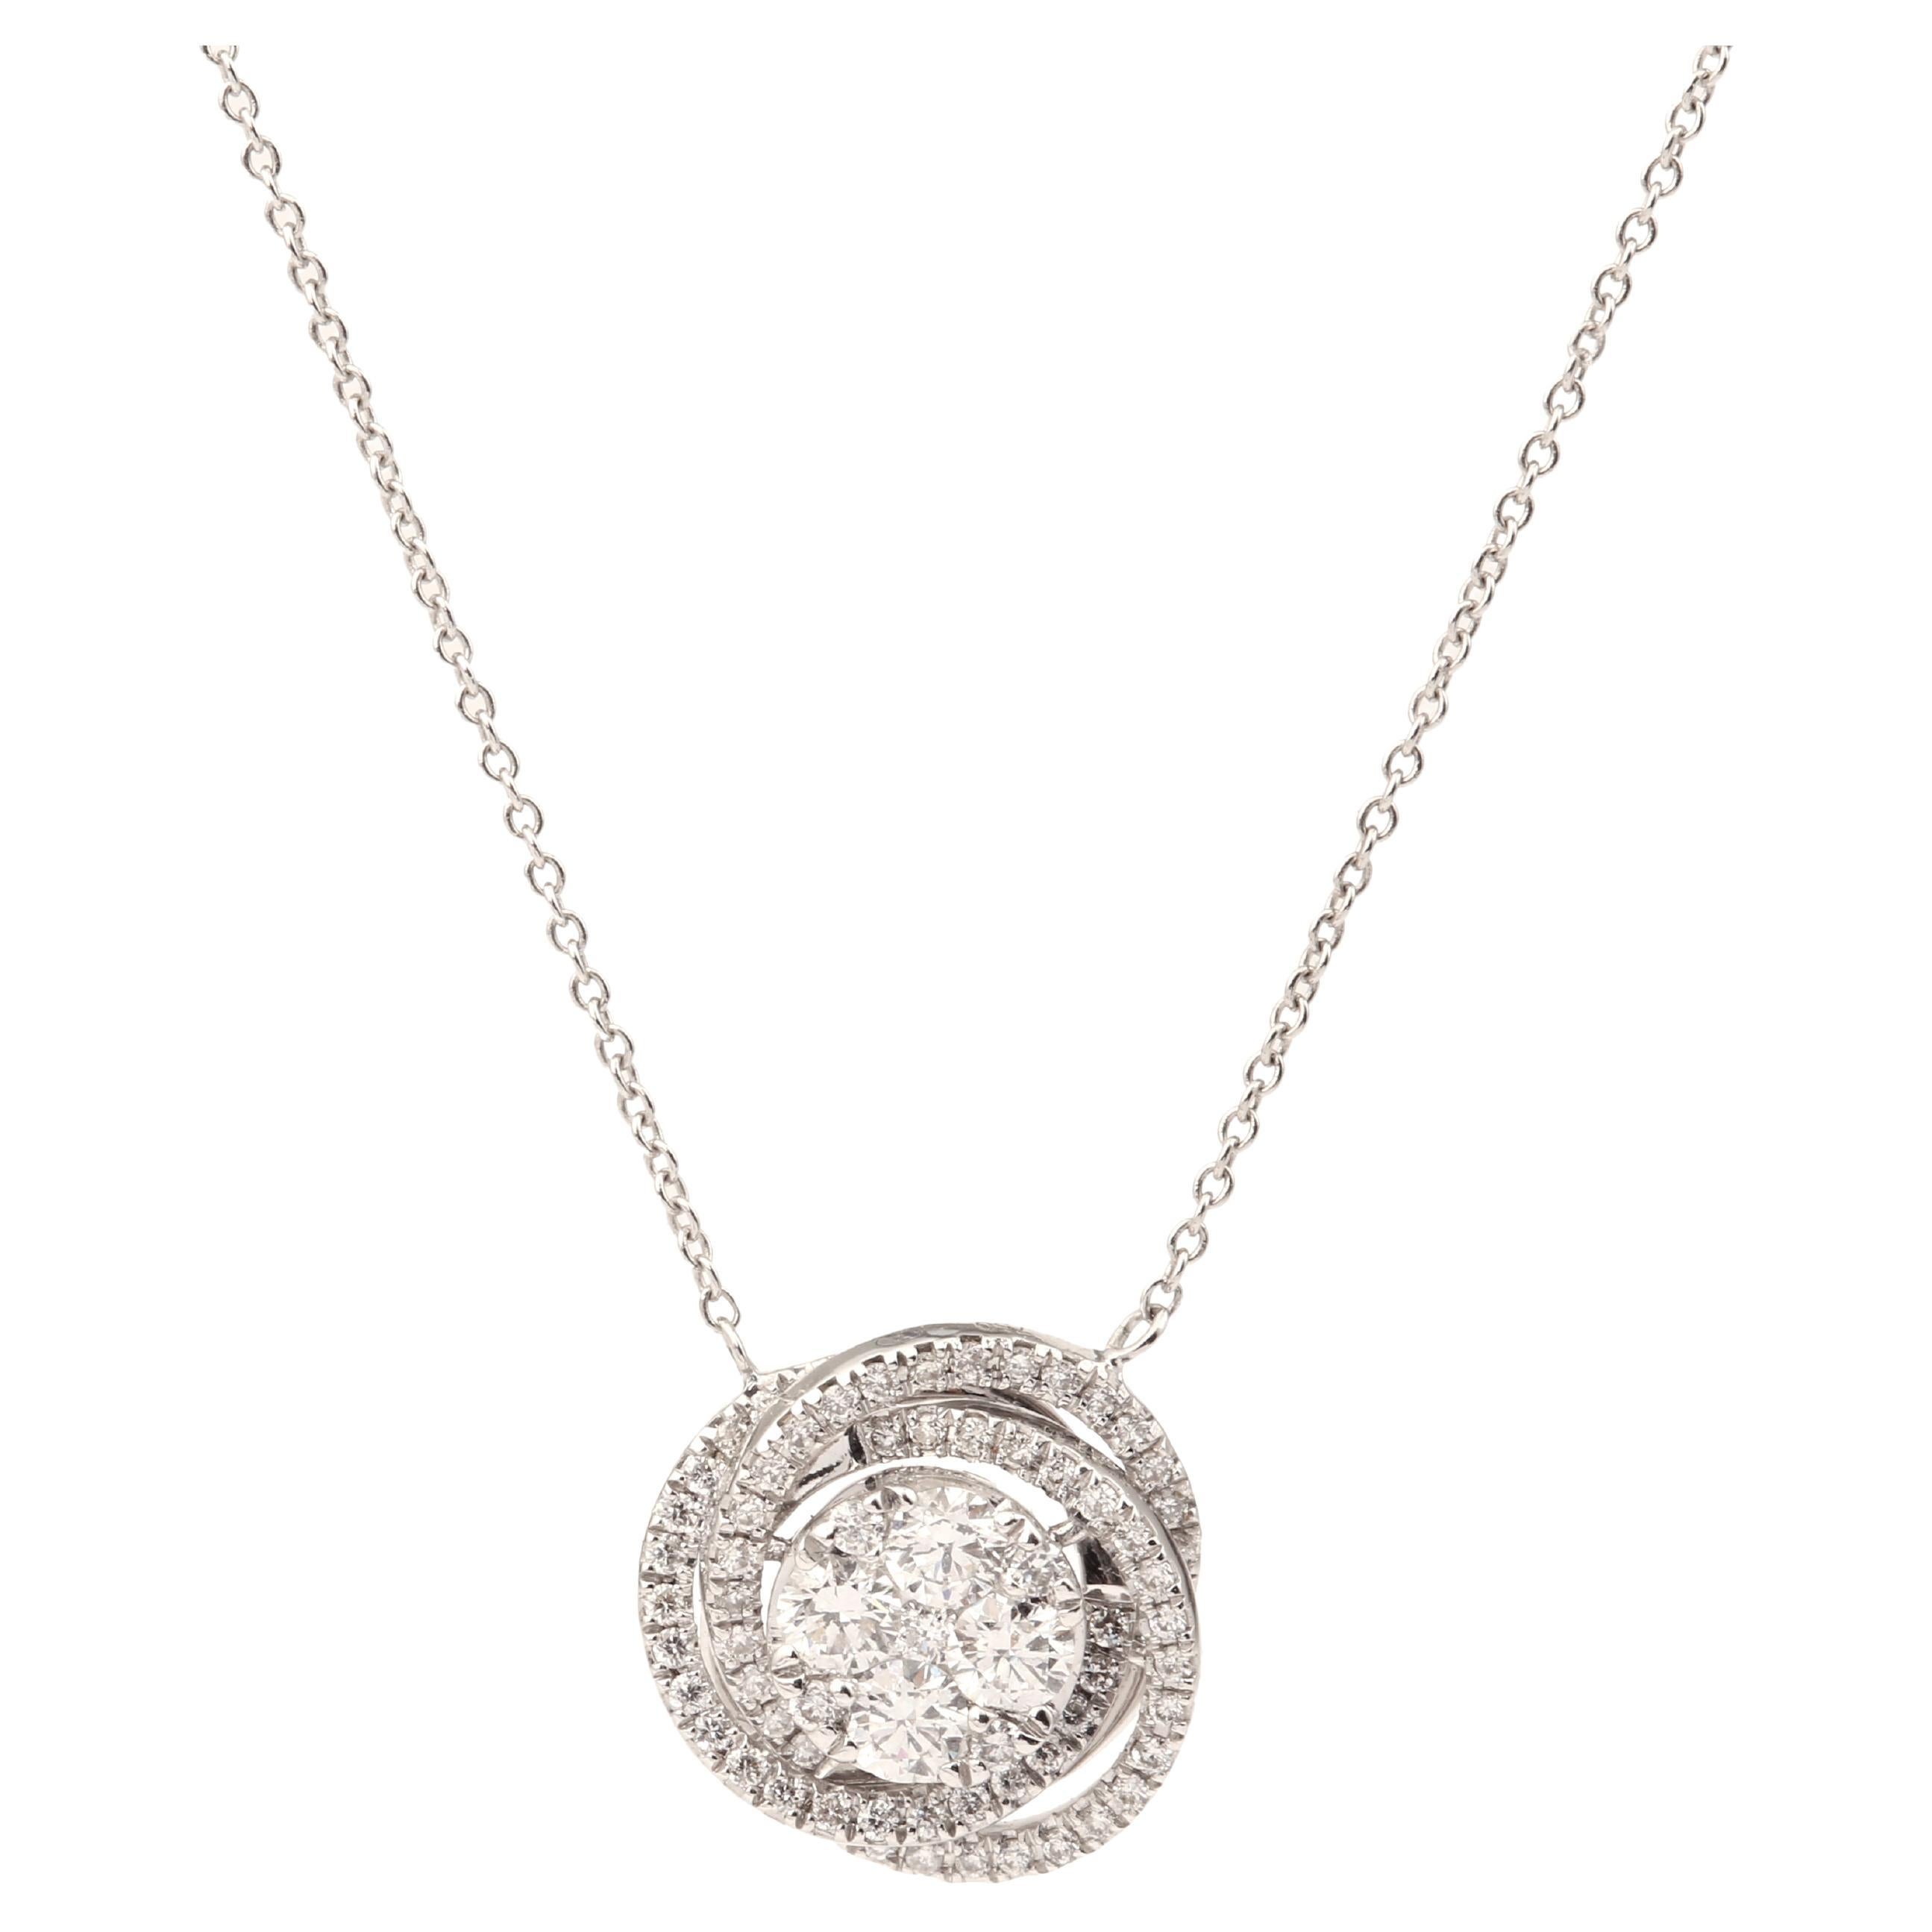 Diamants Collier Whirlwind en or blanc 18 carats